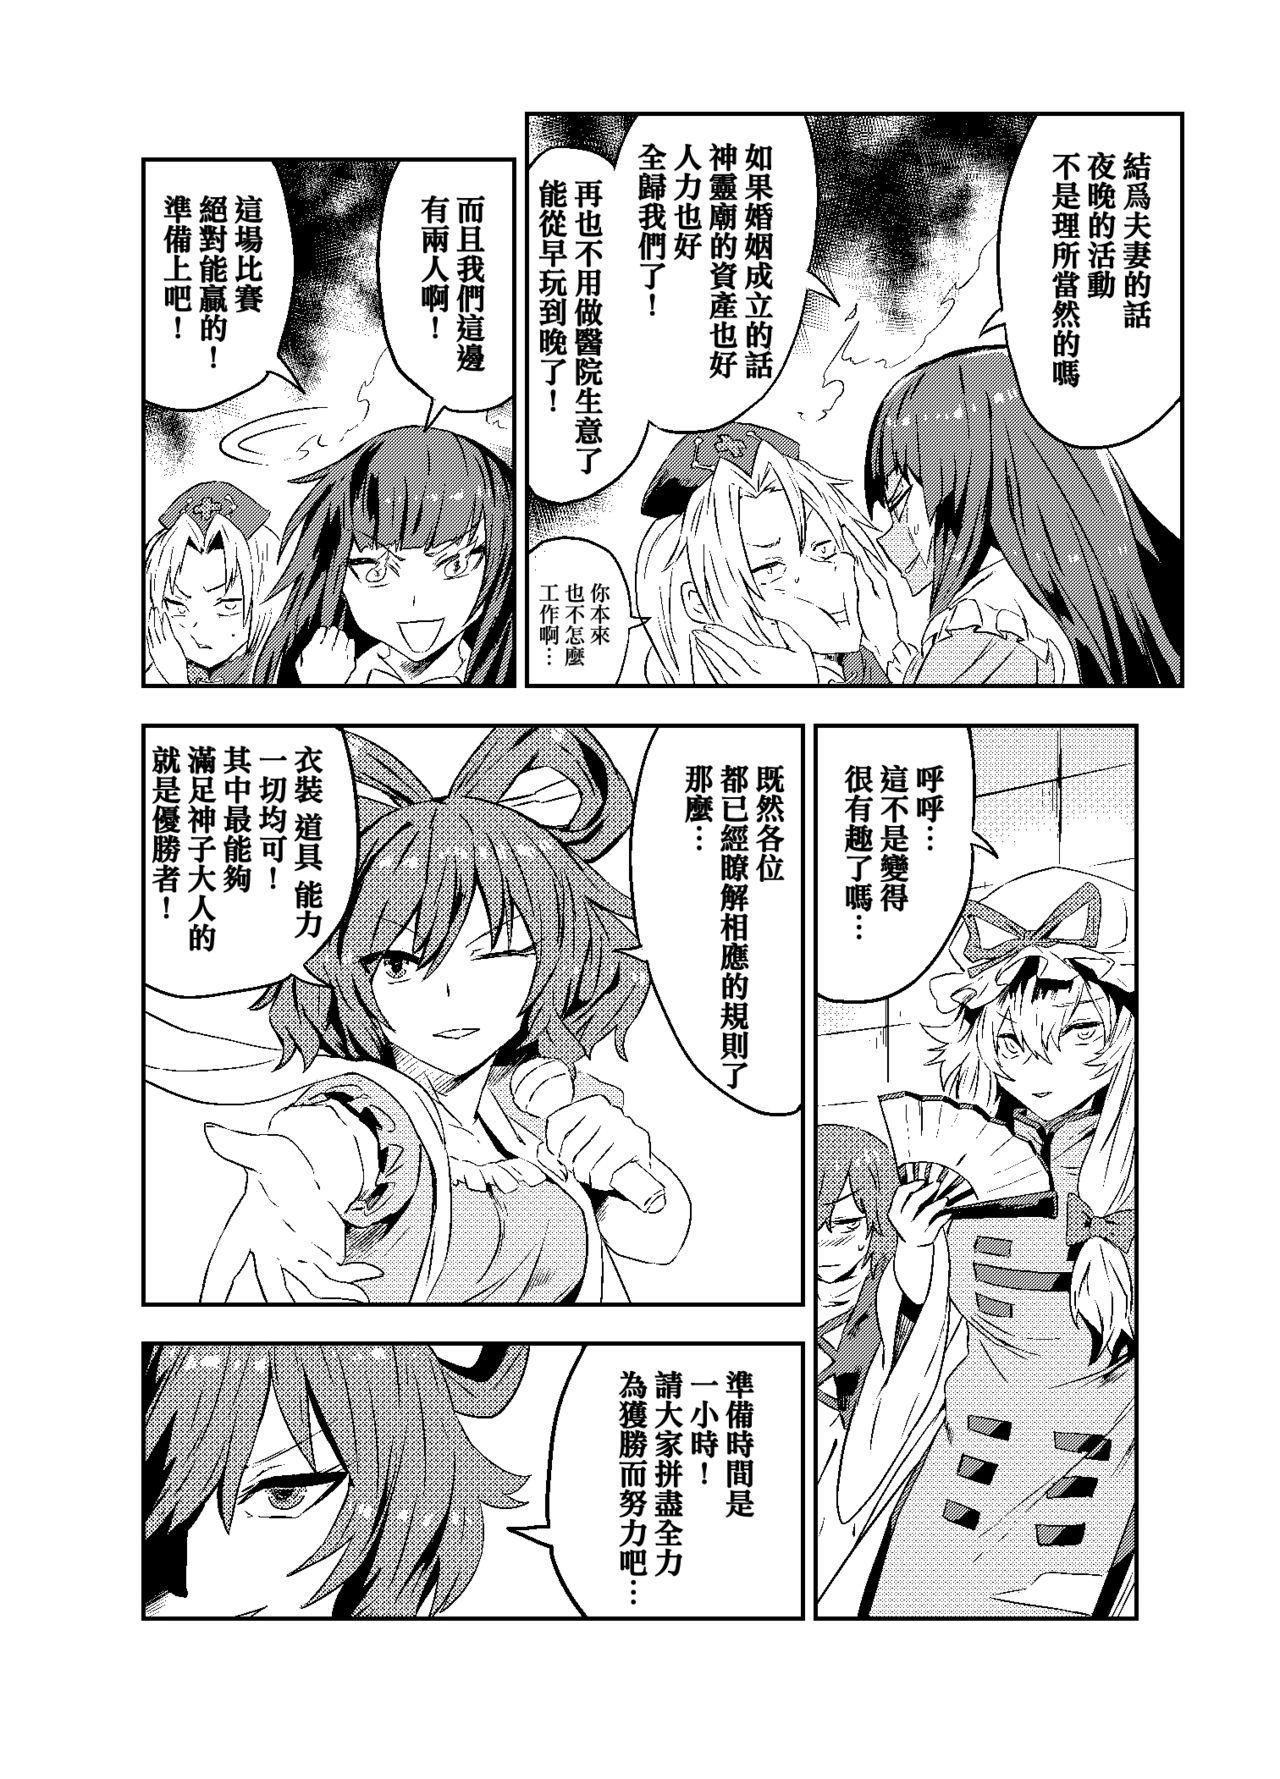 Ride Princess Fight - Touhou project Asses - Page 7